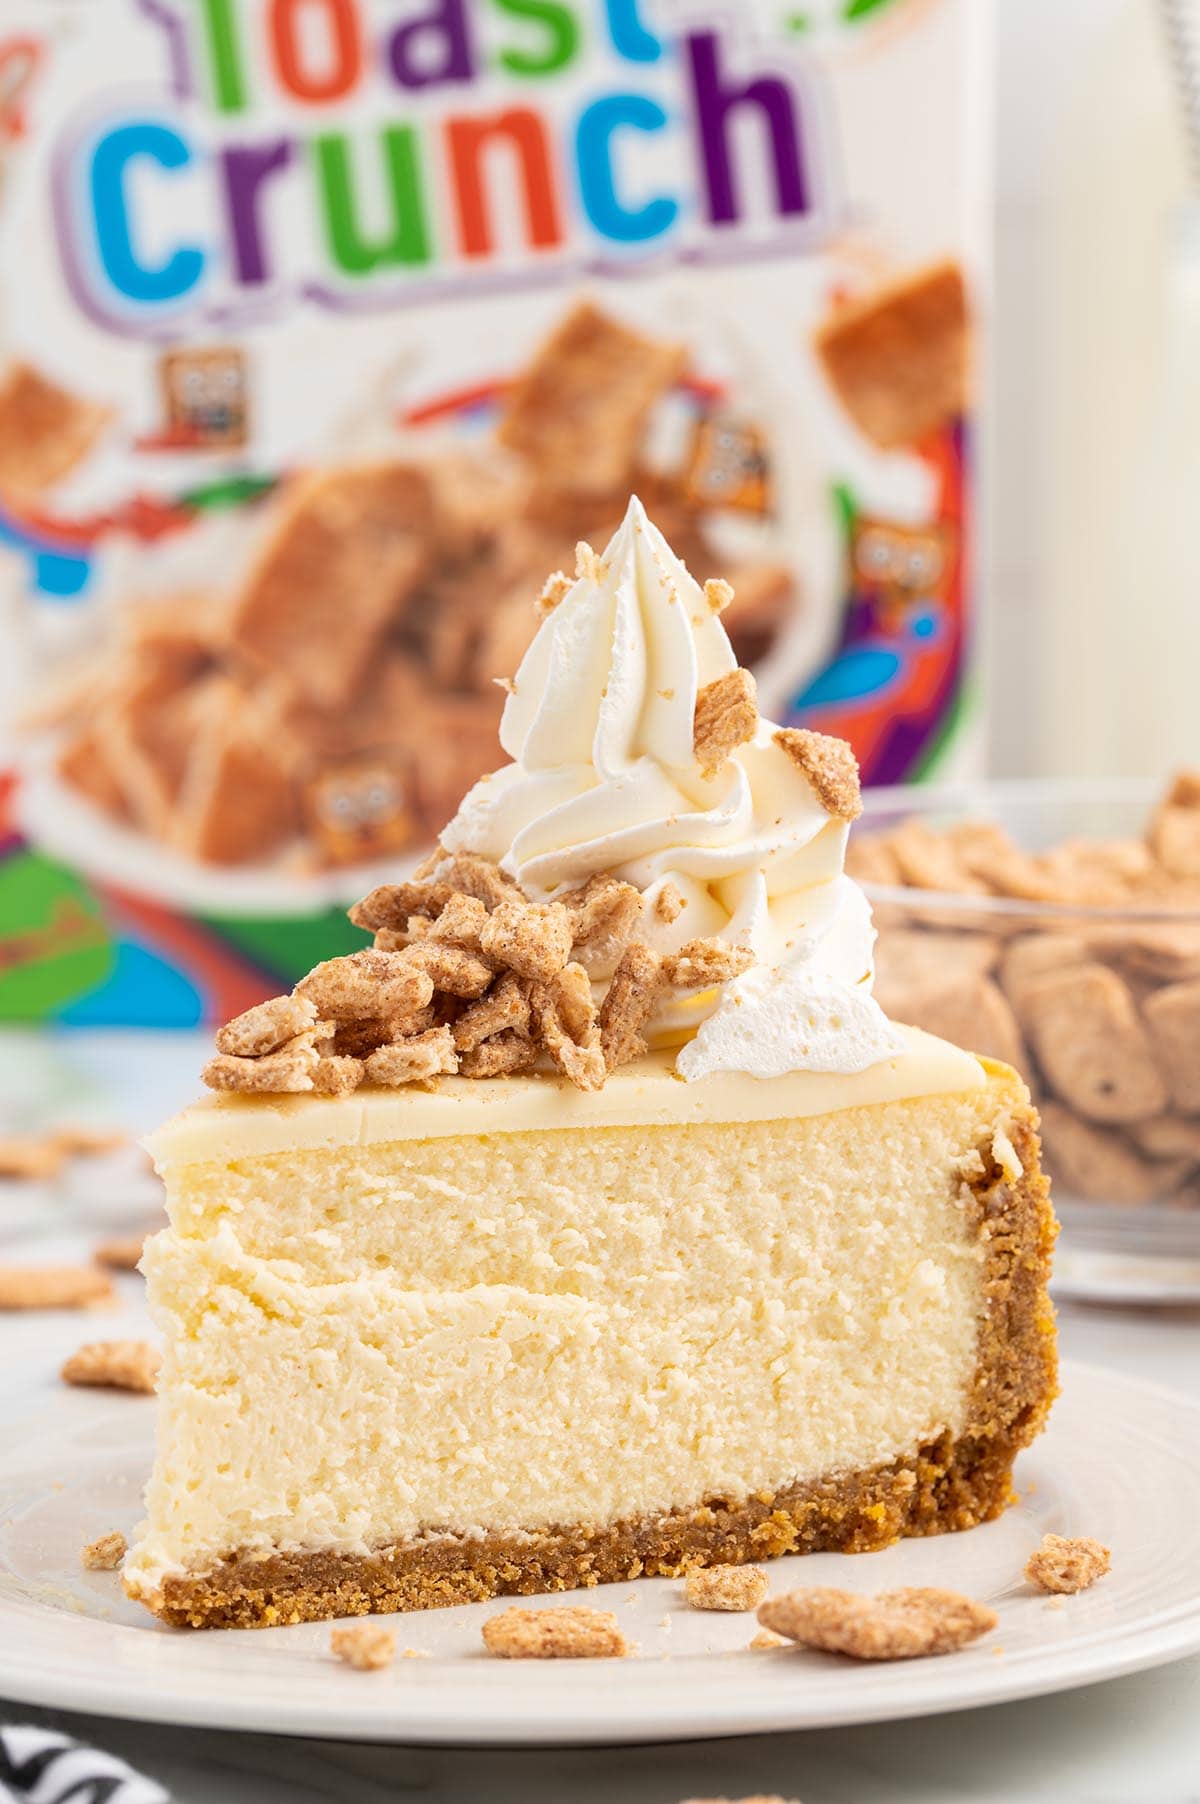 one slice of Cinnamon Toast Crunch Cheesecake on a plate.